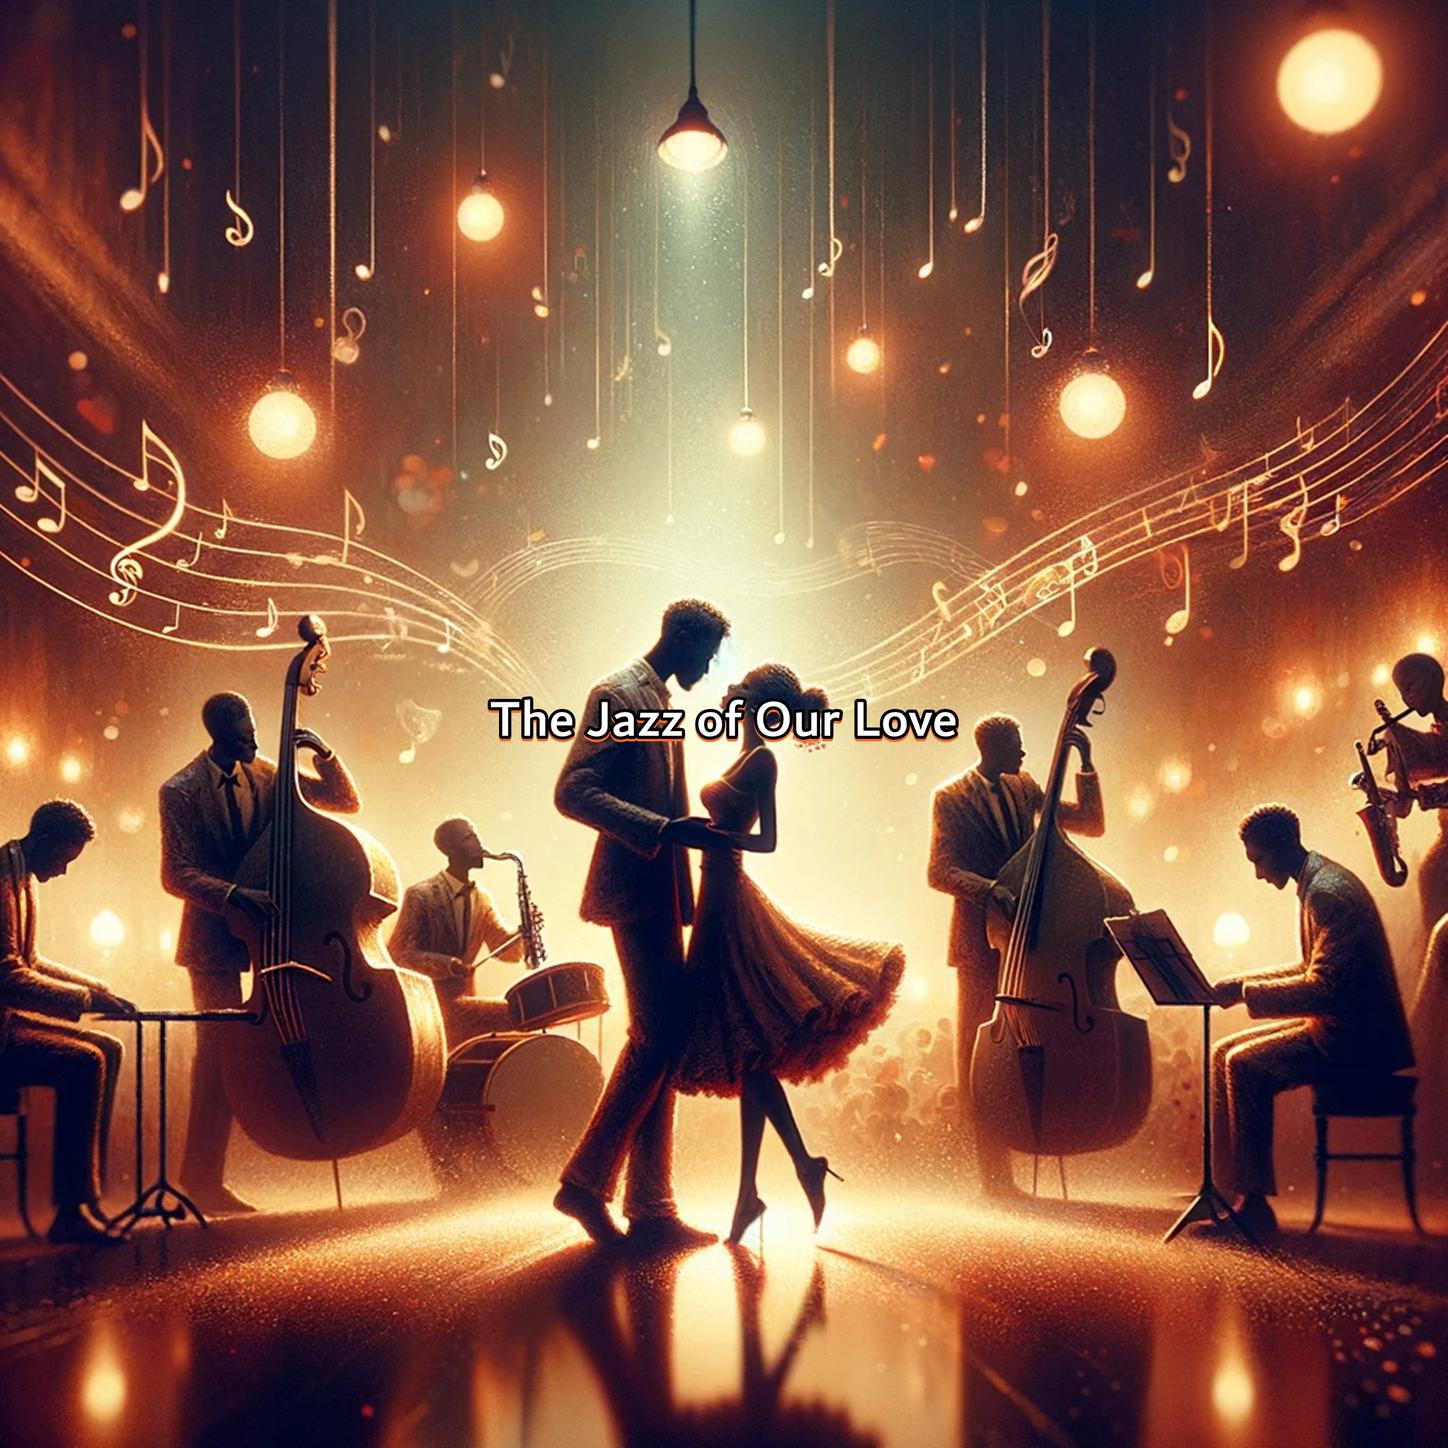 Great Jazz - The Pleasure of Loving You to the Sound of Jazz